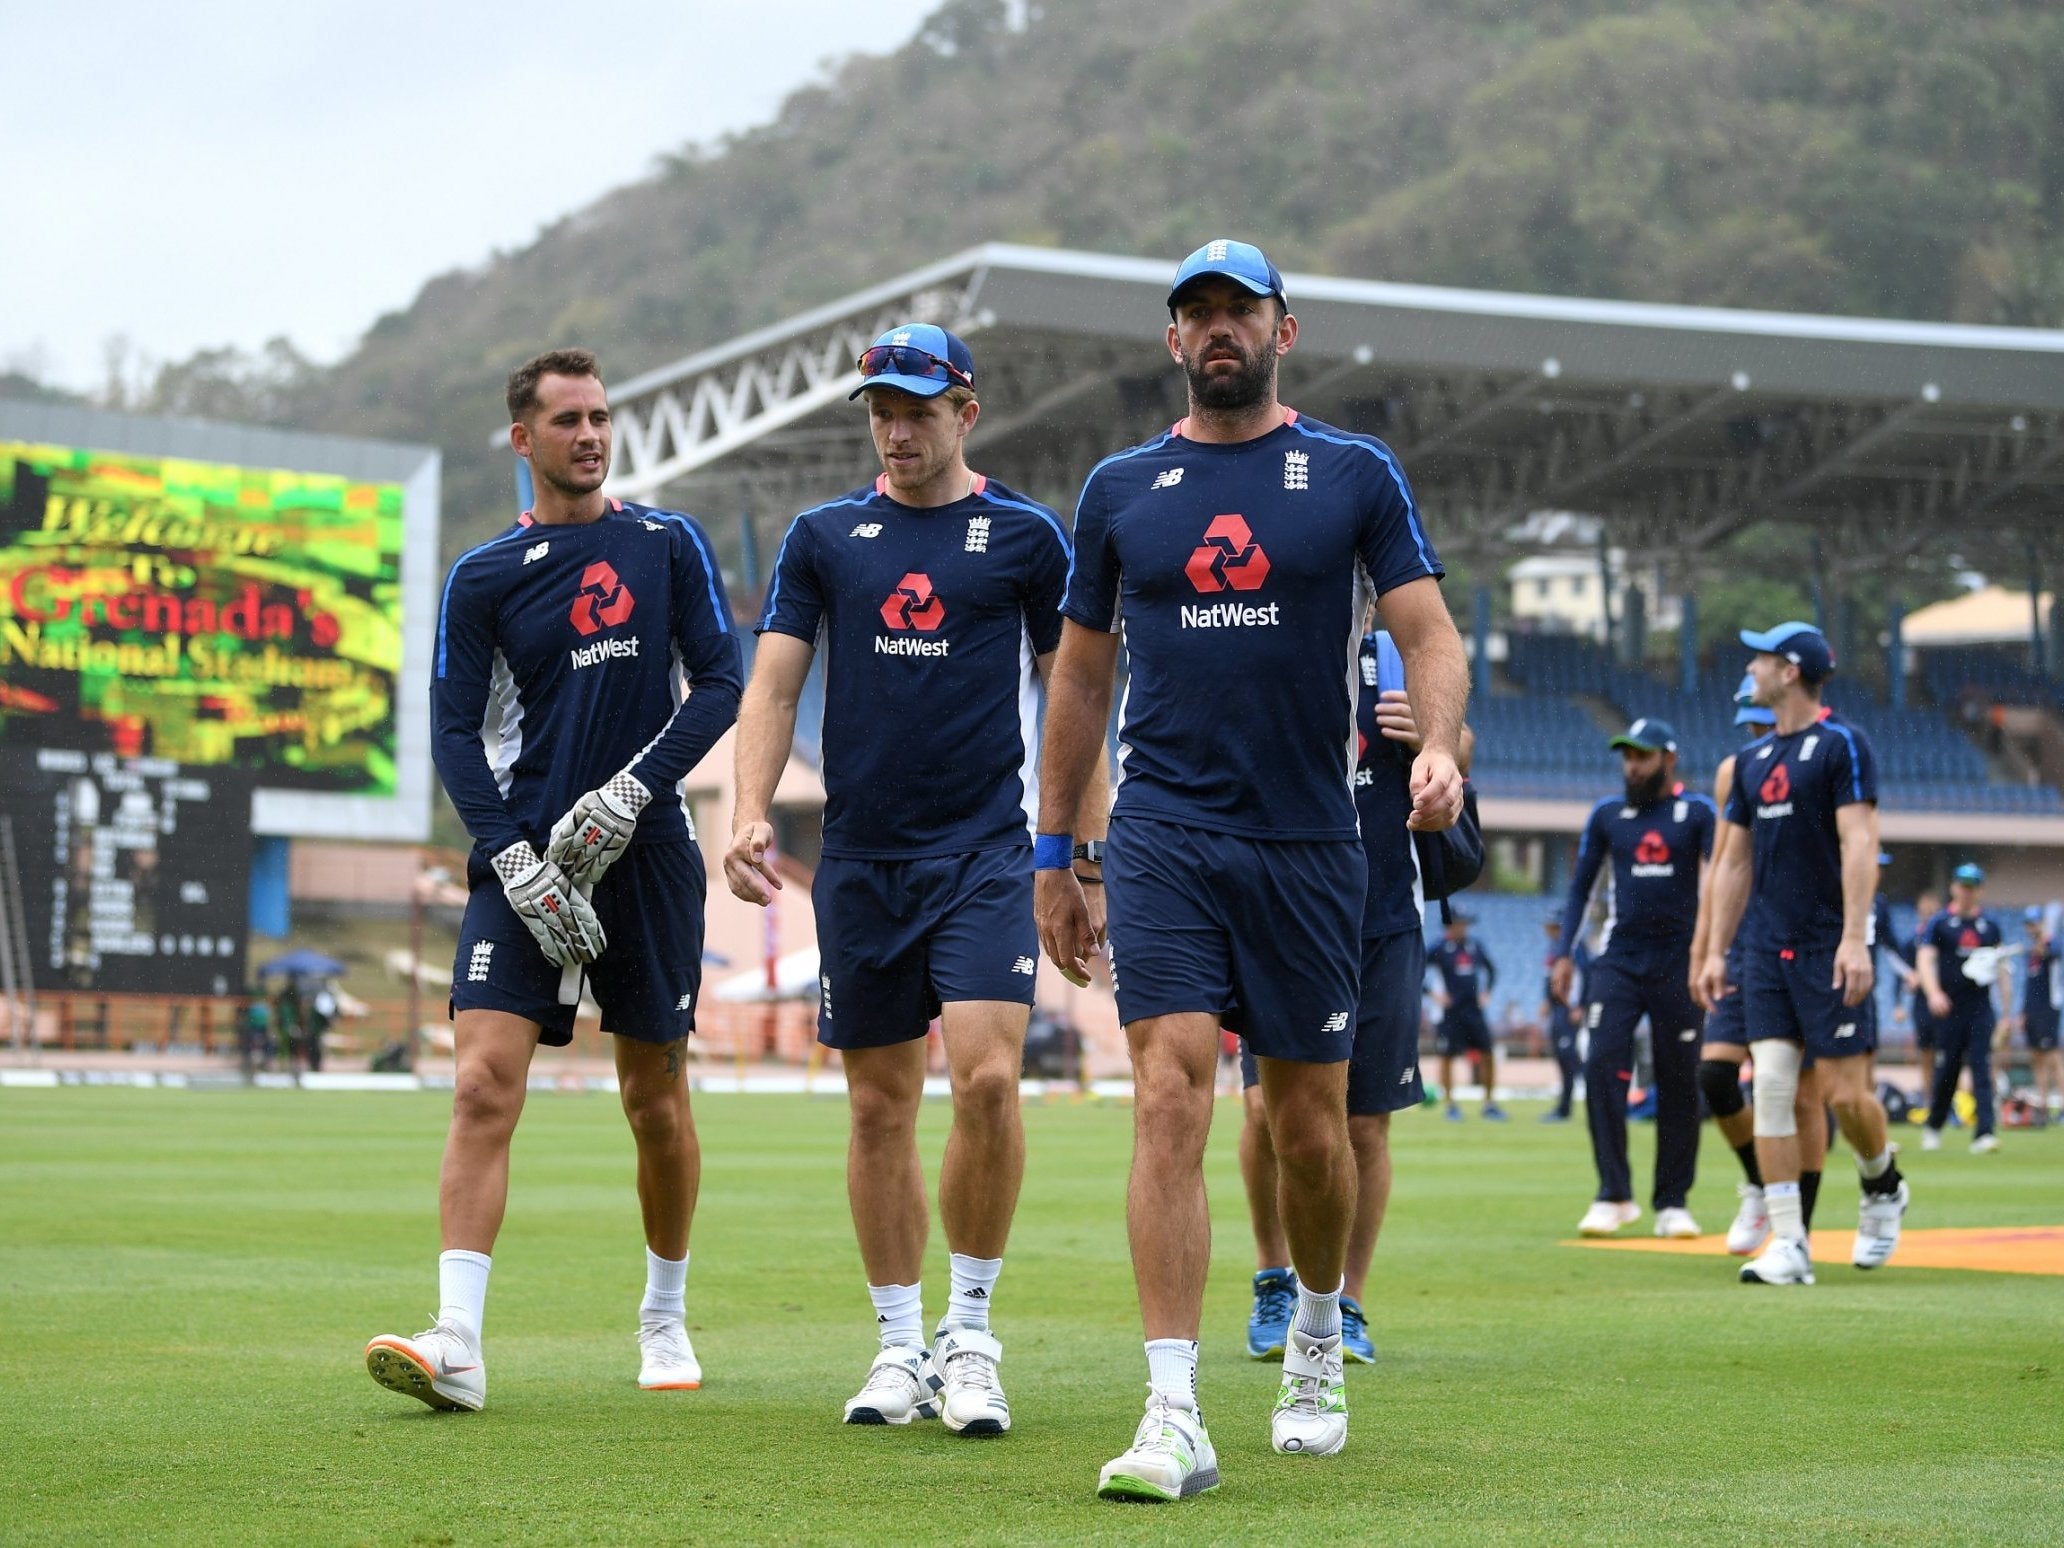 The England players leaving the field as rain begins to fall